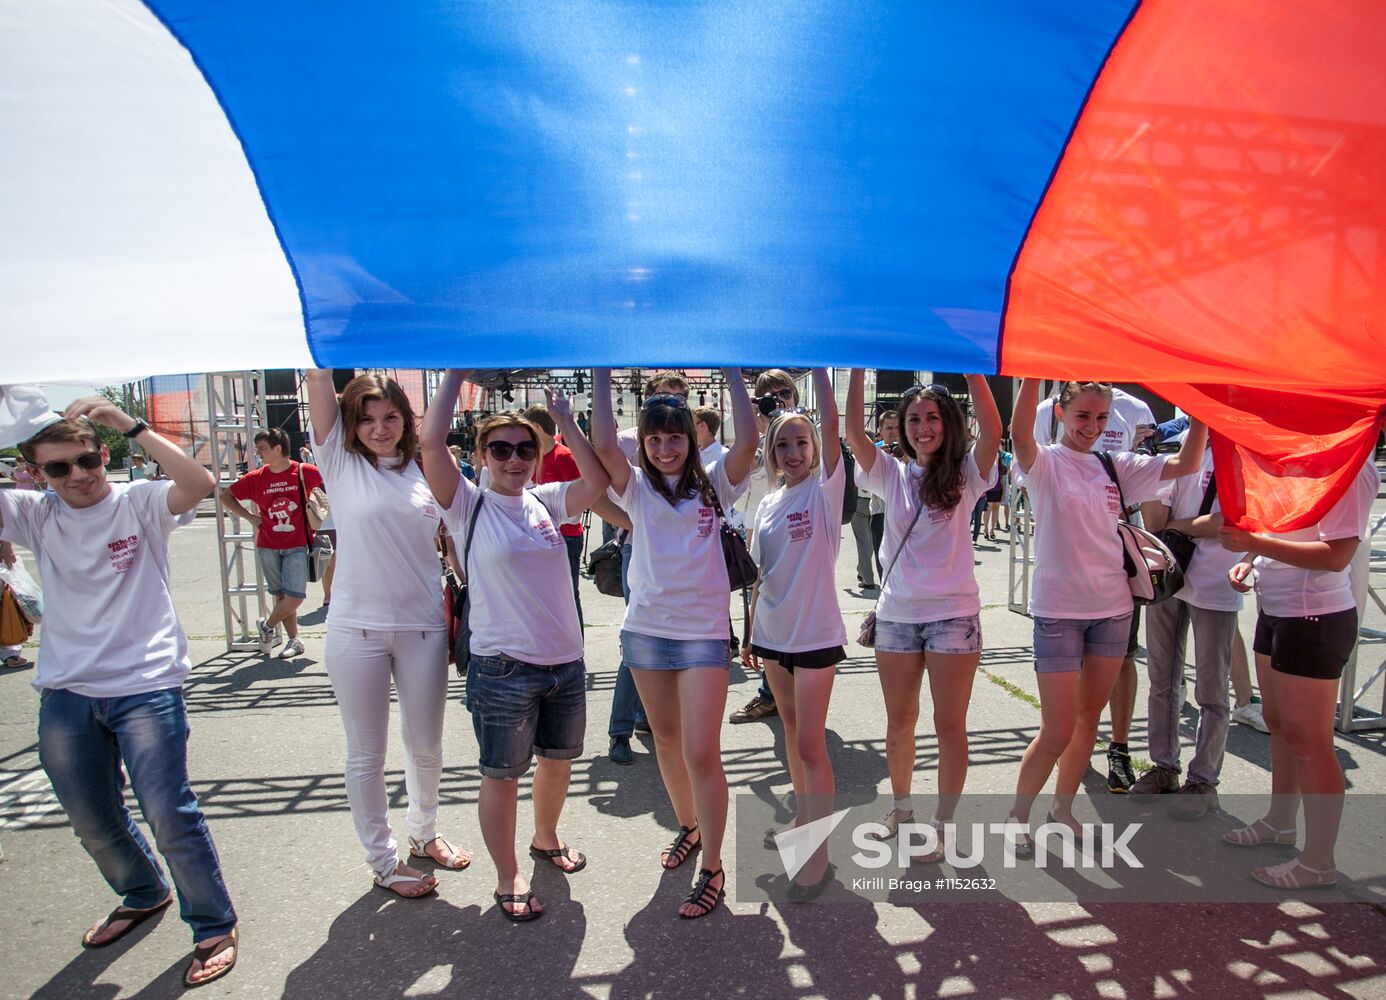 Russia Day celebrations across the country